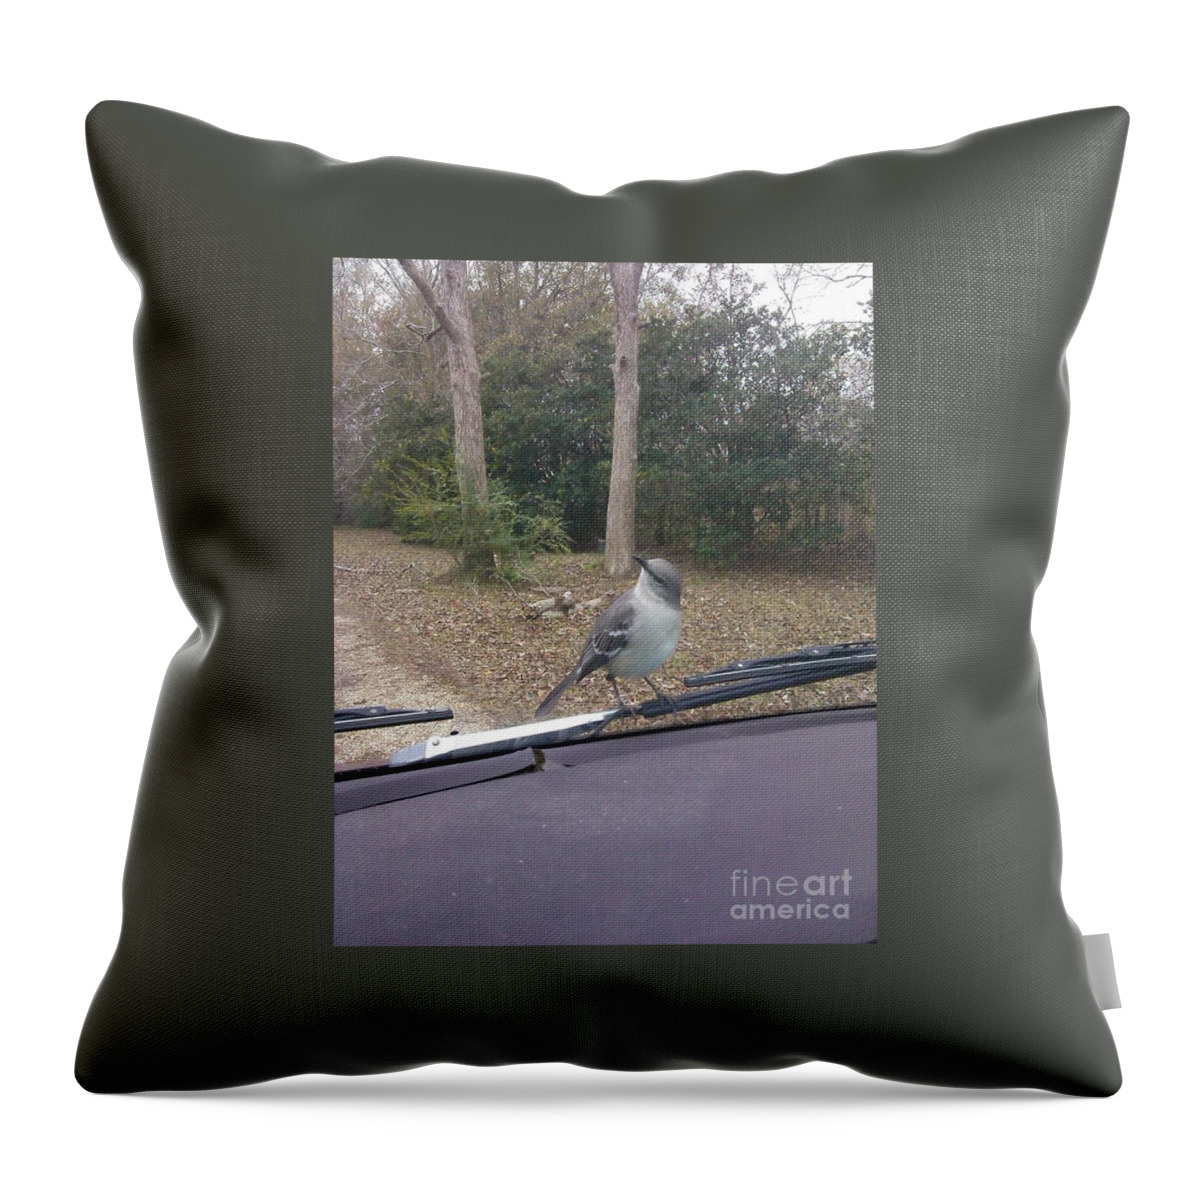 Unexpected Visitor Throw Pillow featuring the photograph Unexpected Visitor by Seaux-N-Seau Soileau